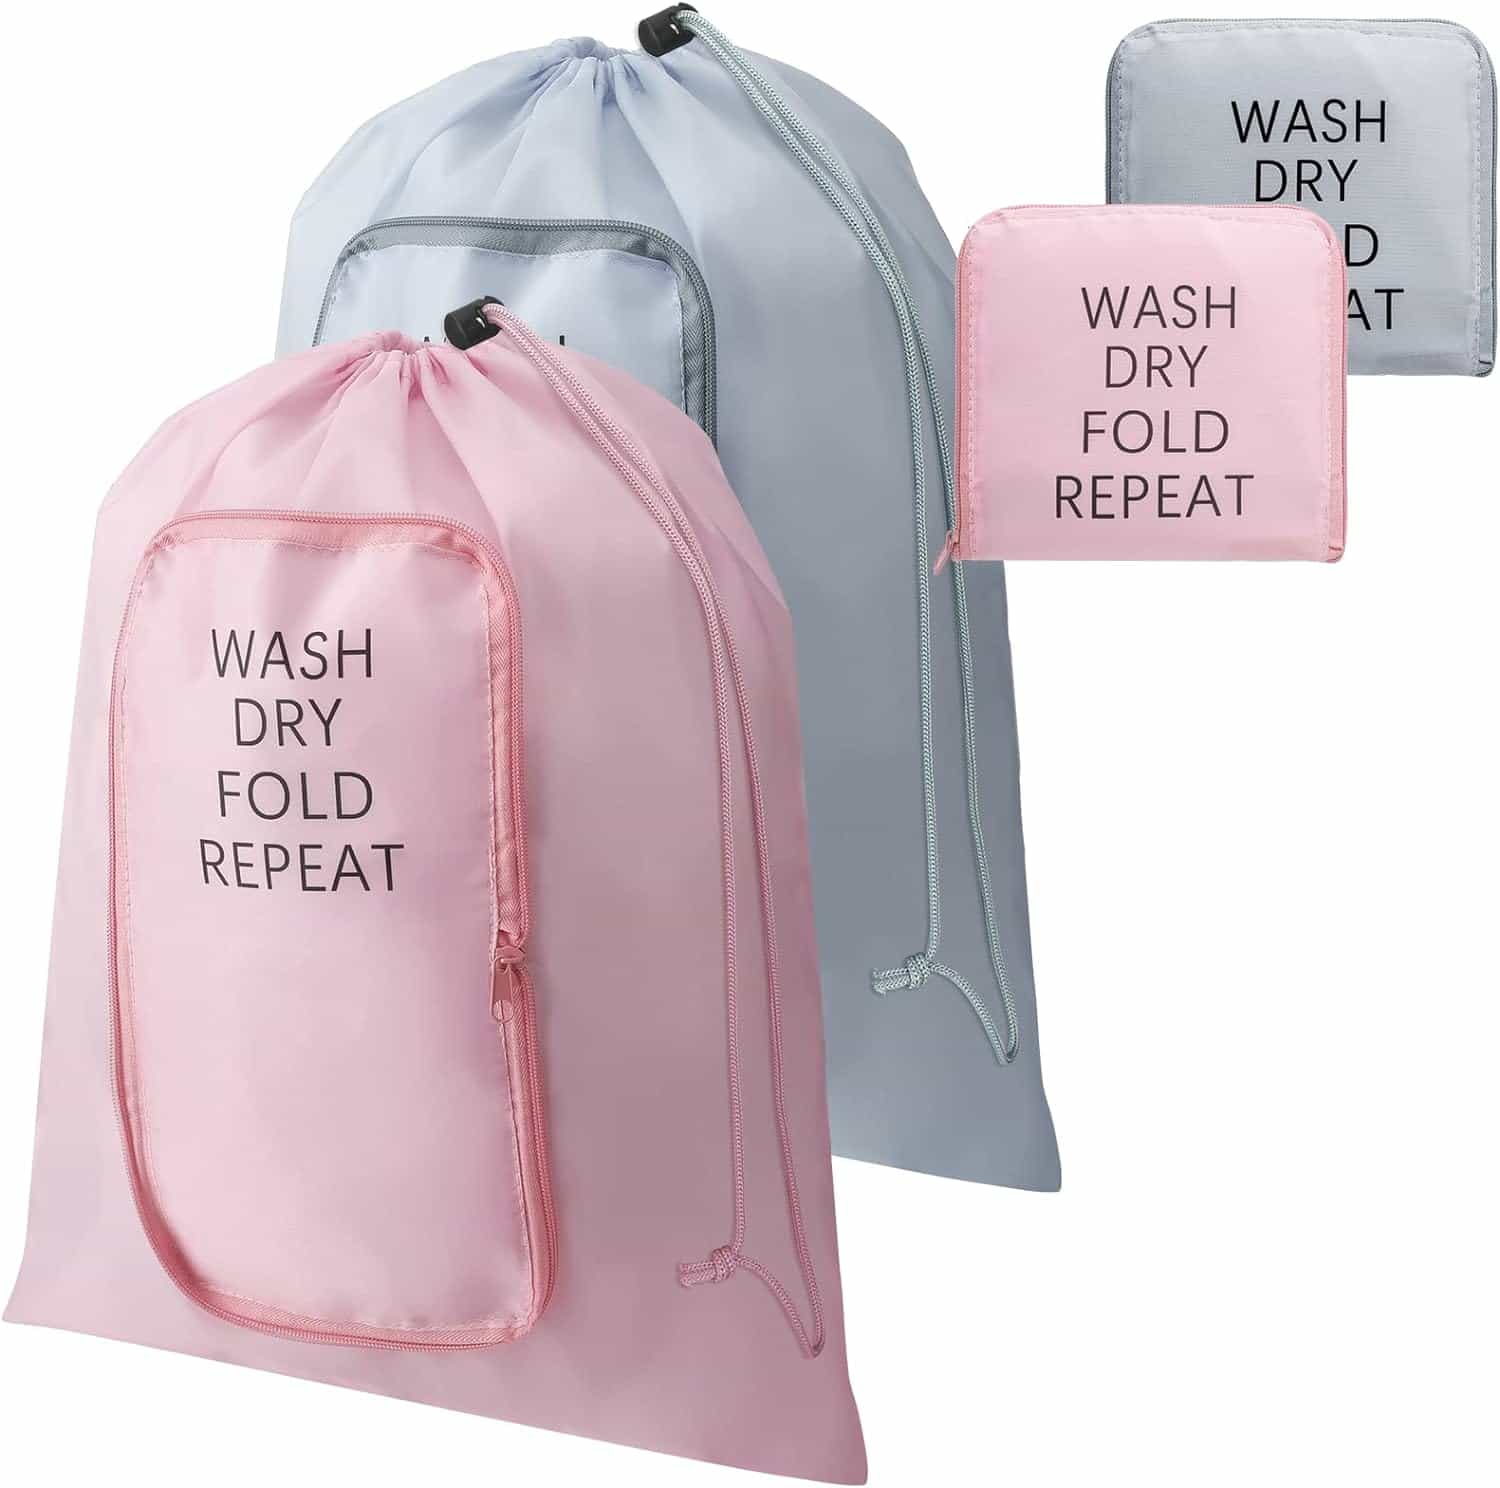 Laundry Bags for Traveling: Your Ultimate Packing Companion